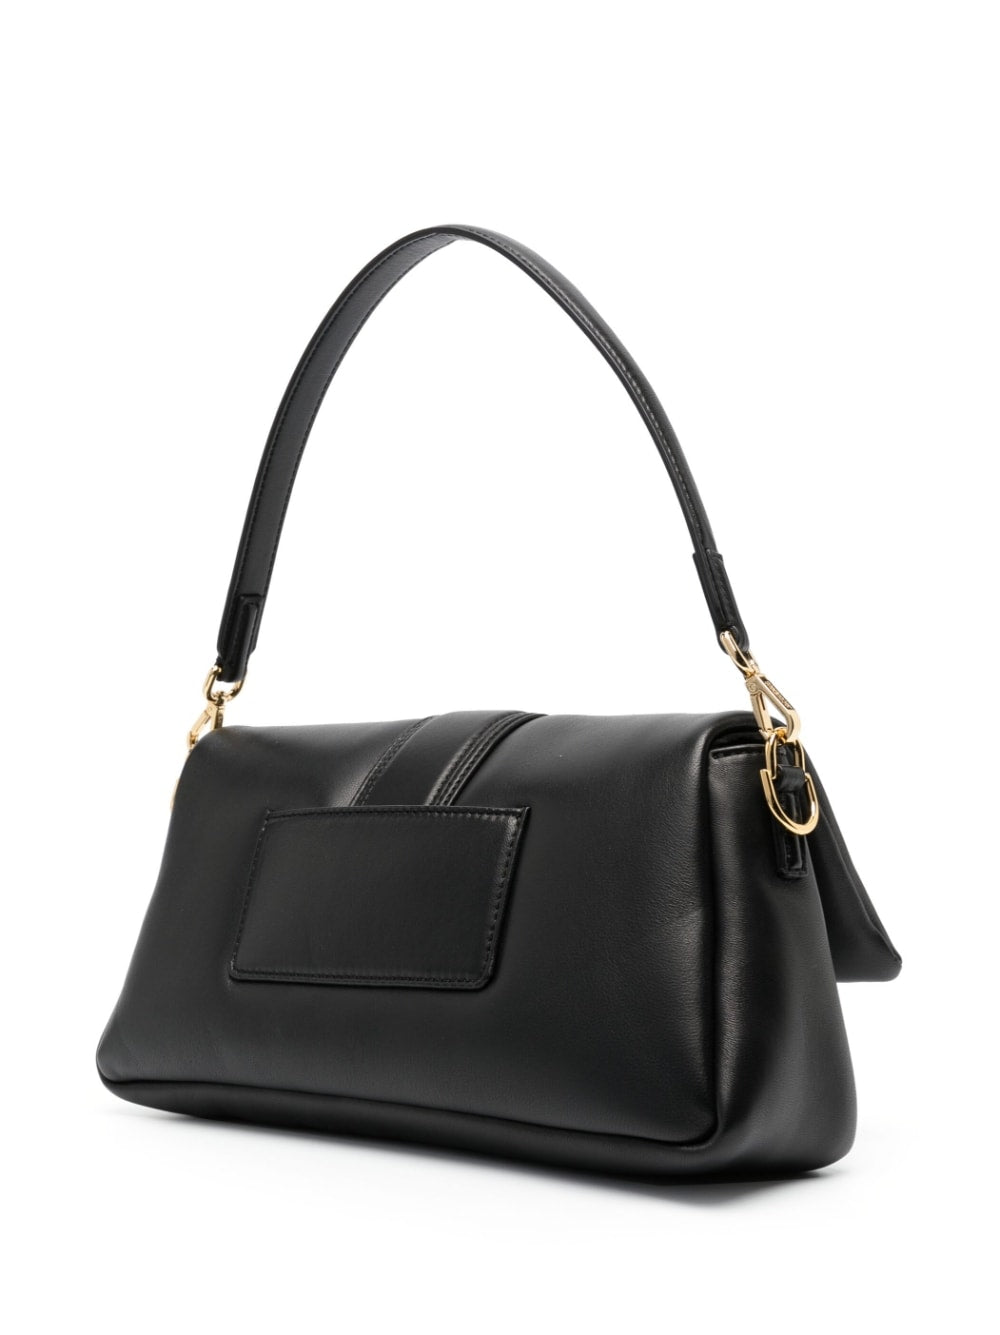 JACQUEMUS Padded Leather Handbag with Metal Logo and Detachable Shoulder Straps